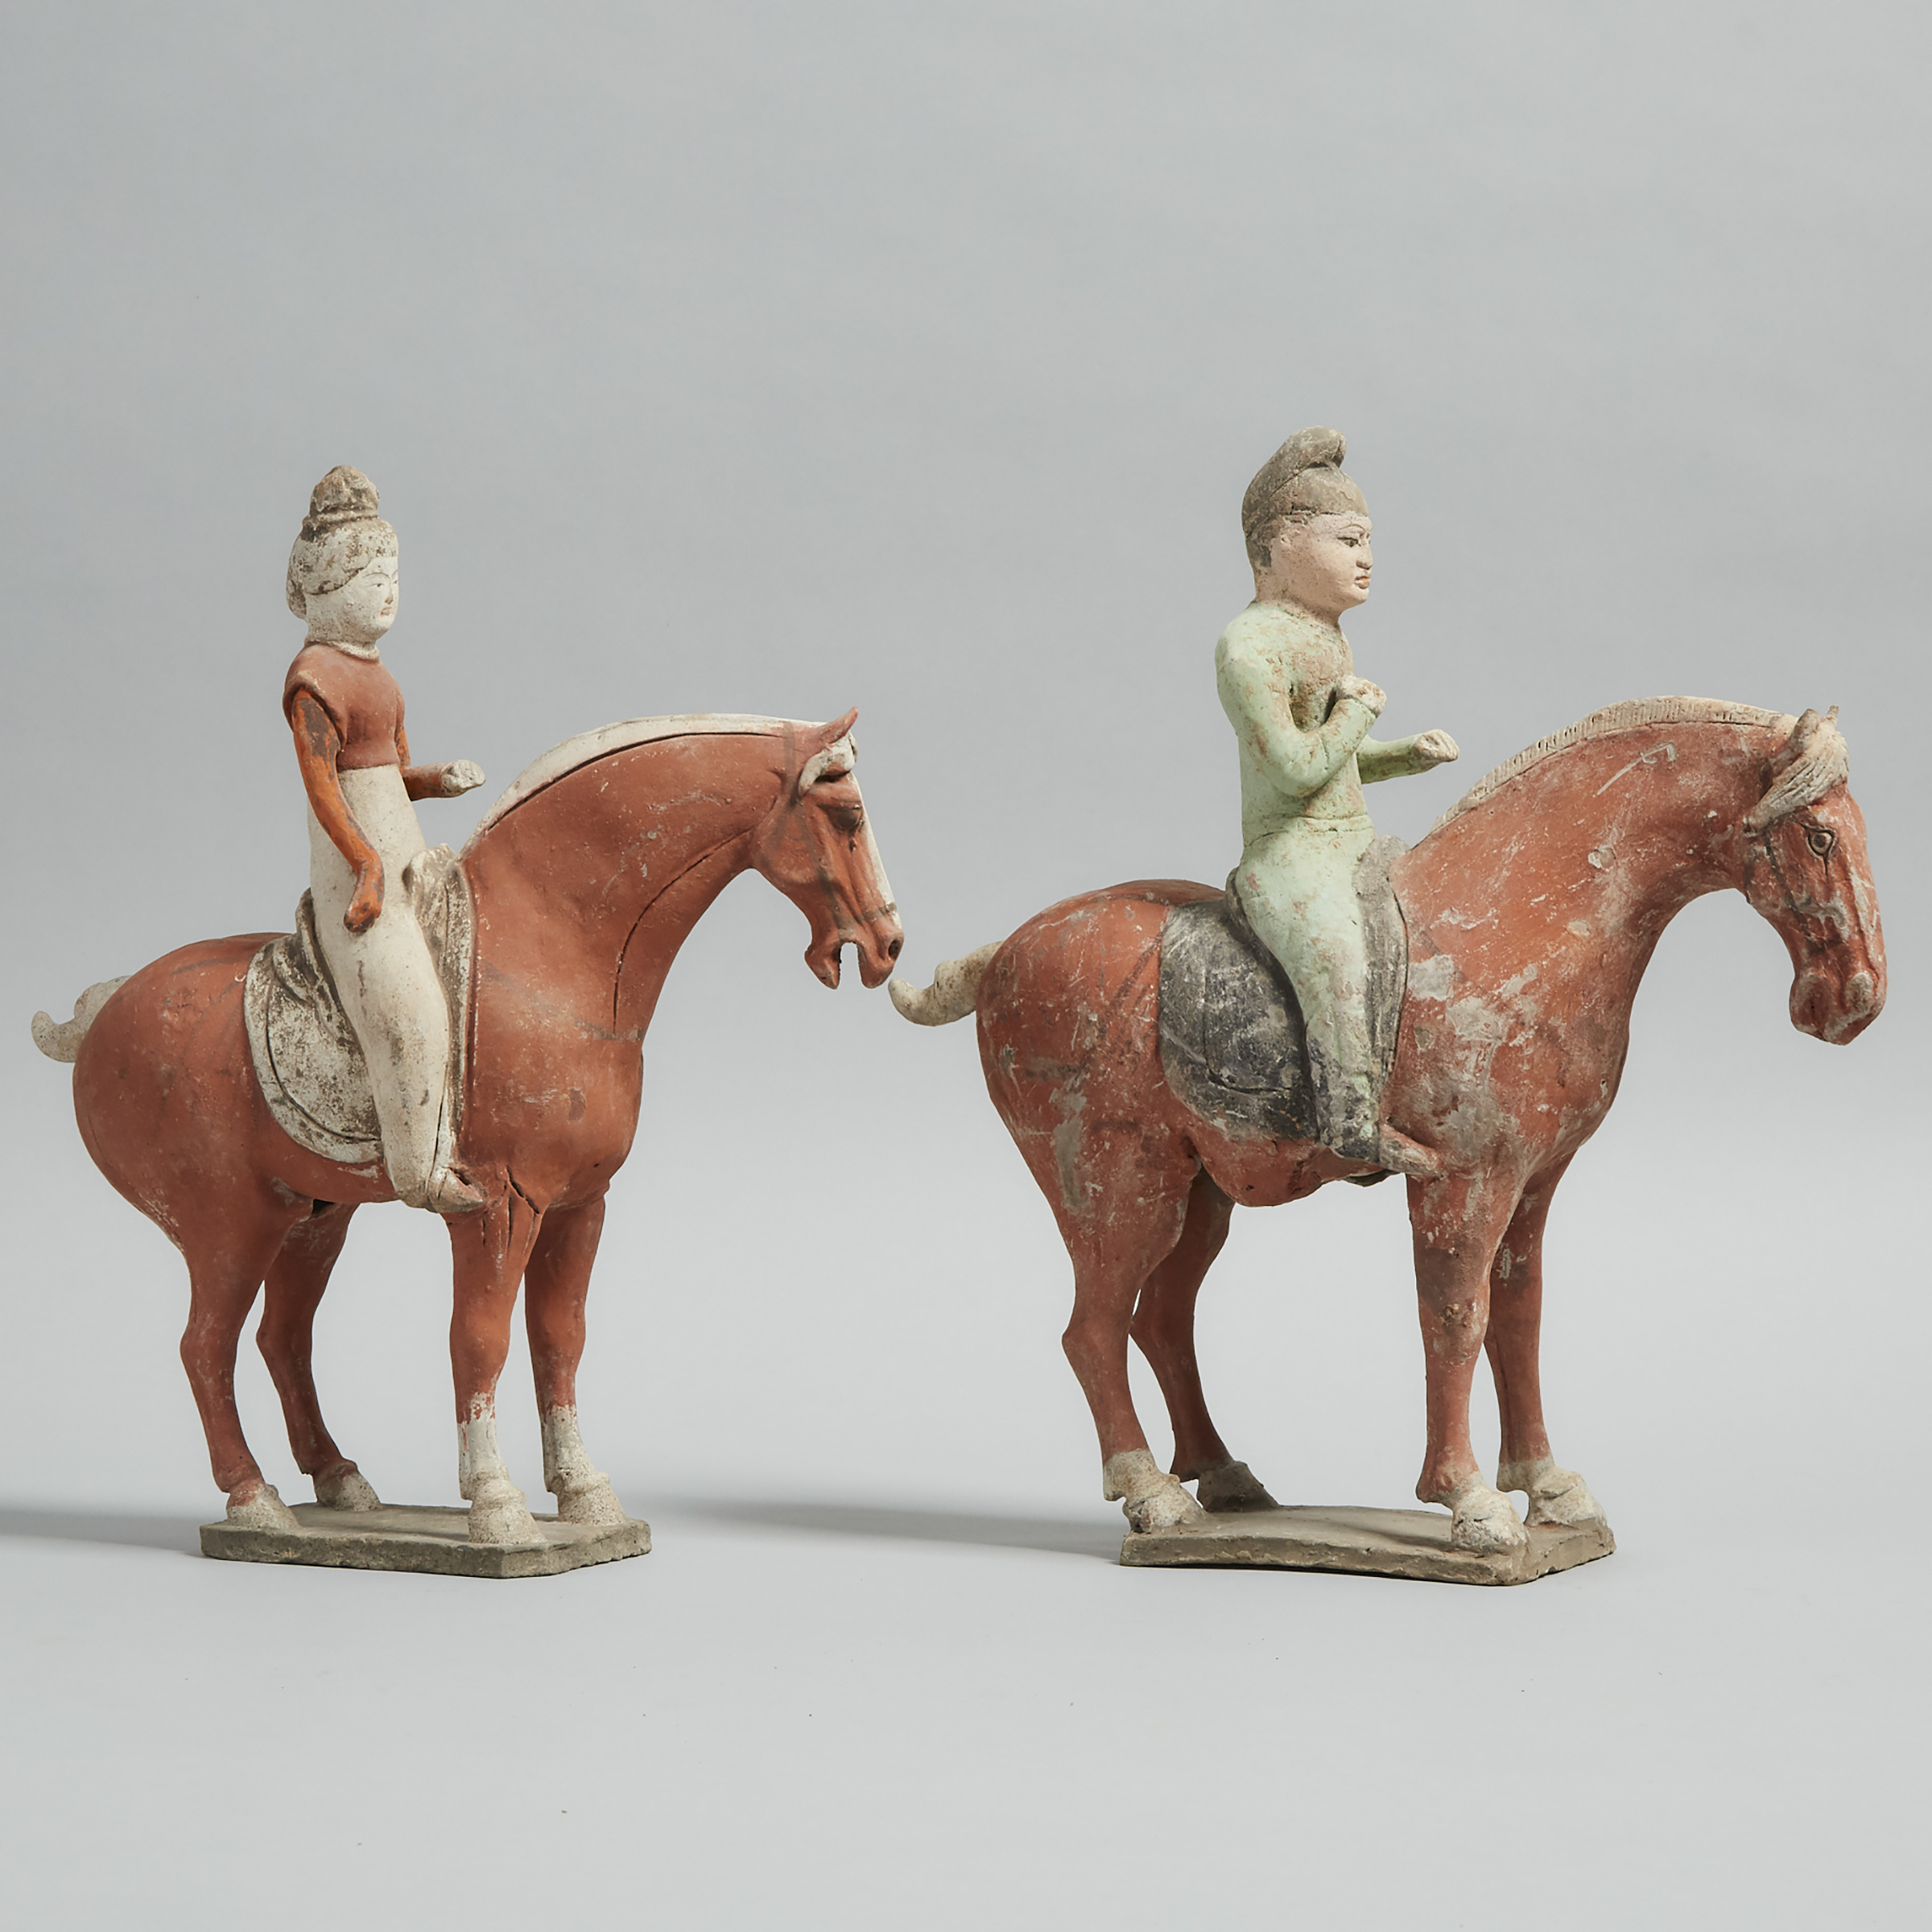 Two Pottery Figures of Horse Riders, Tang Dynasty